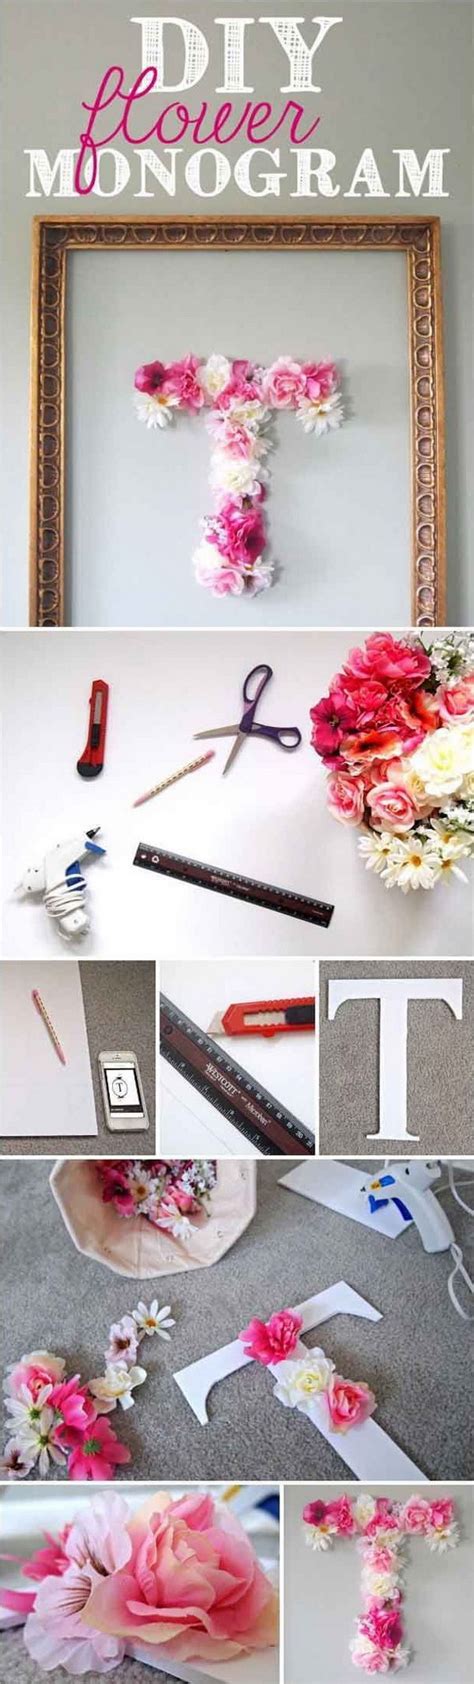 Diy jewelry jewelry making stamped jewelry jewellery deco rose do it yourself inspiration idee diy bijoux diy diy projects to try 25+ DIY Ideas & Tutorials for Teenage Girl's Room ...